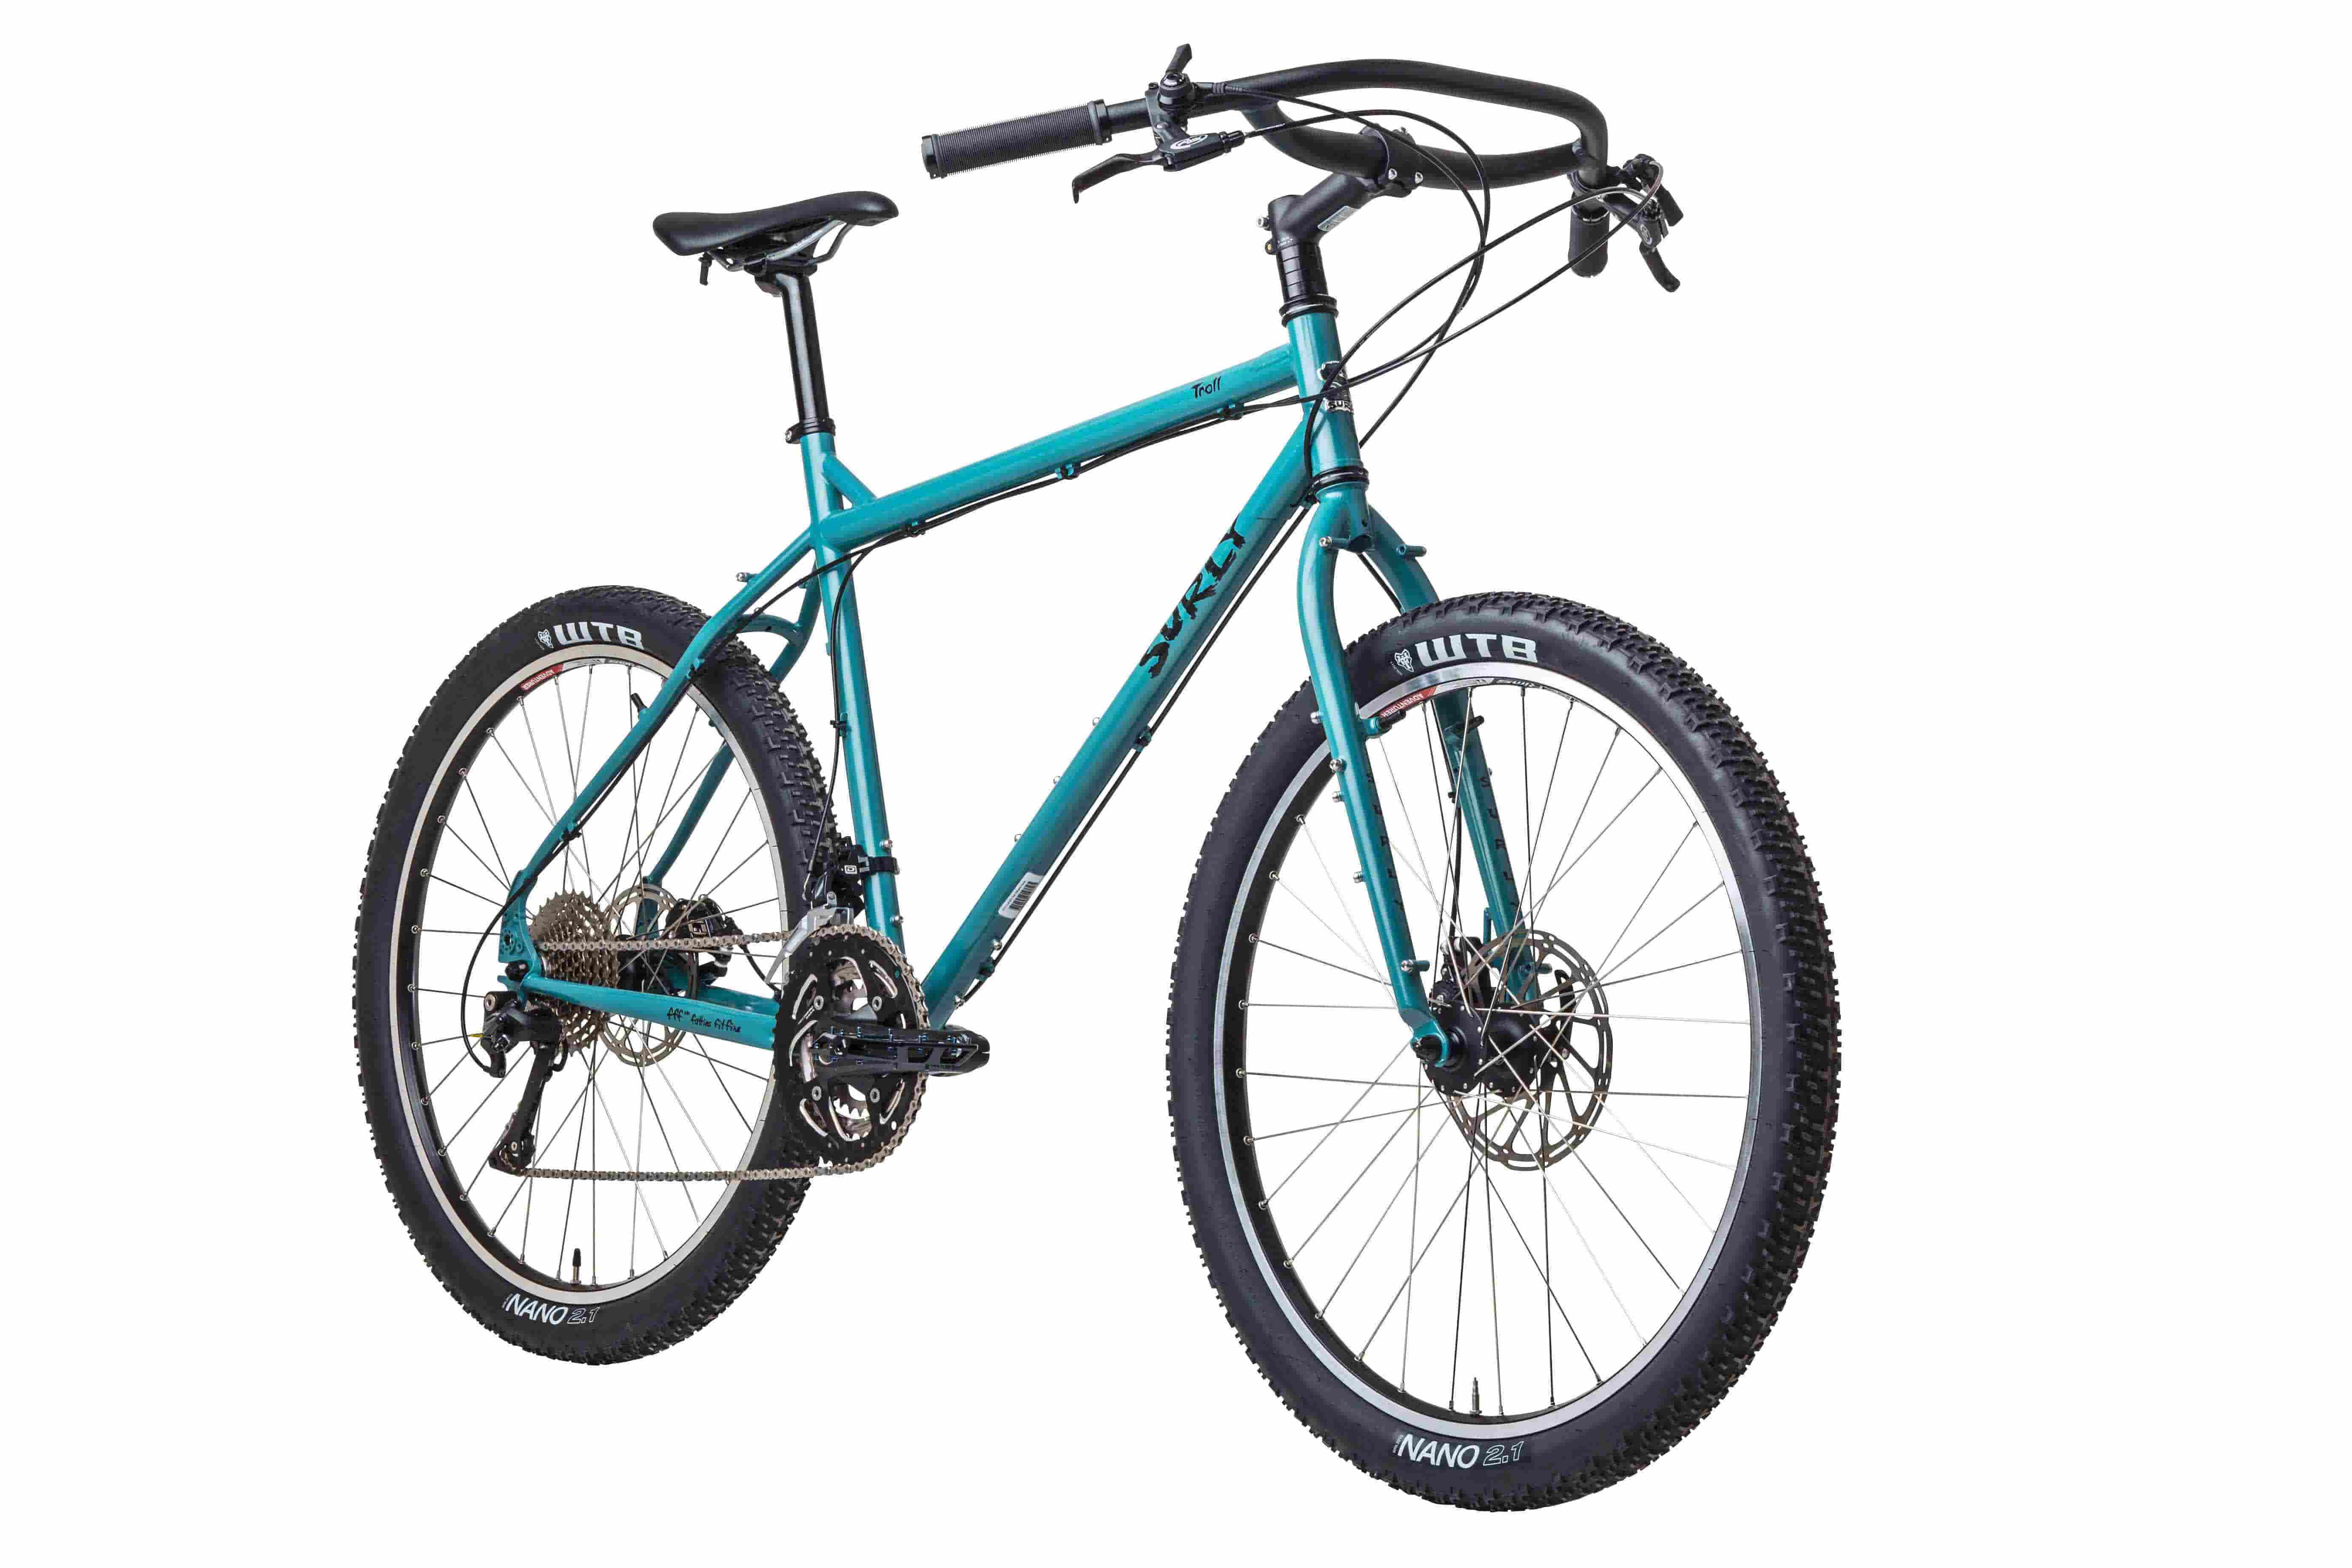 Surly Troll bike - Teal - right side angled view